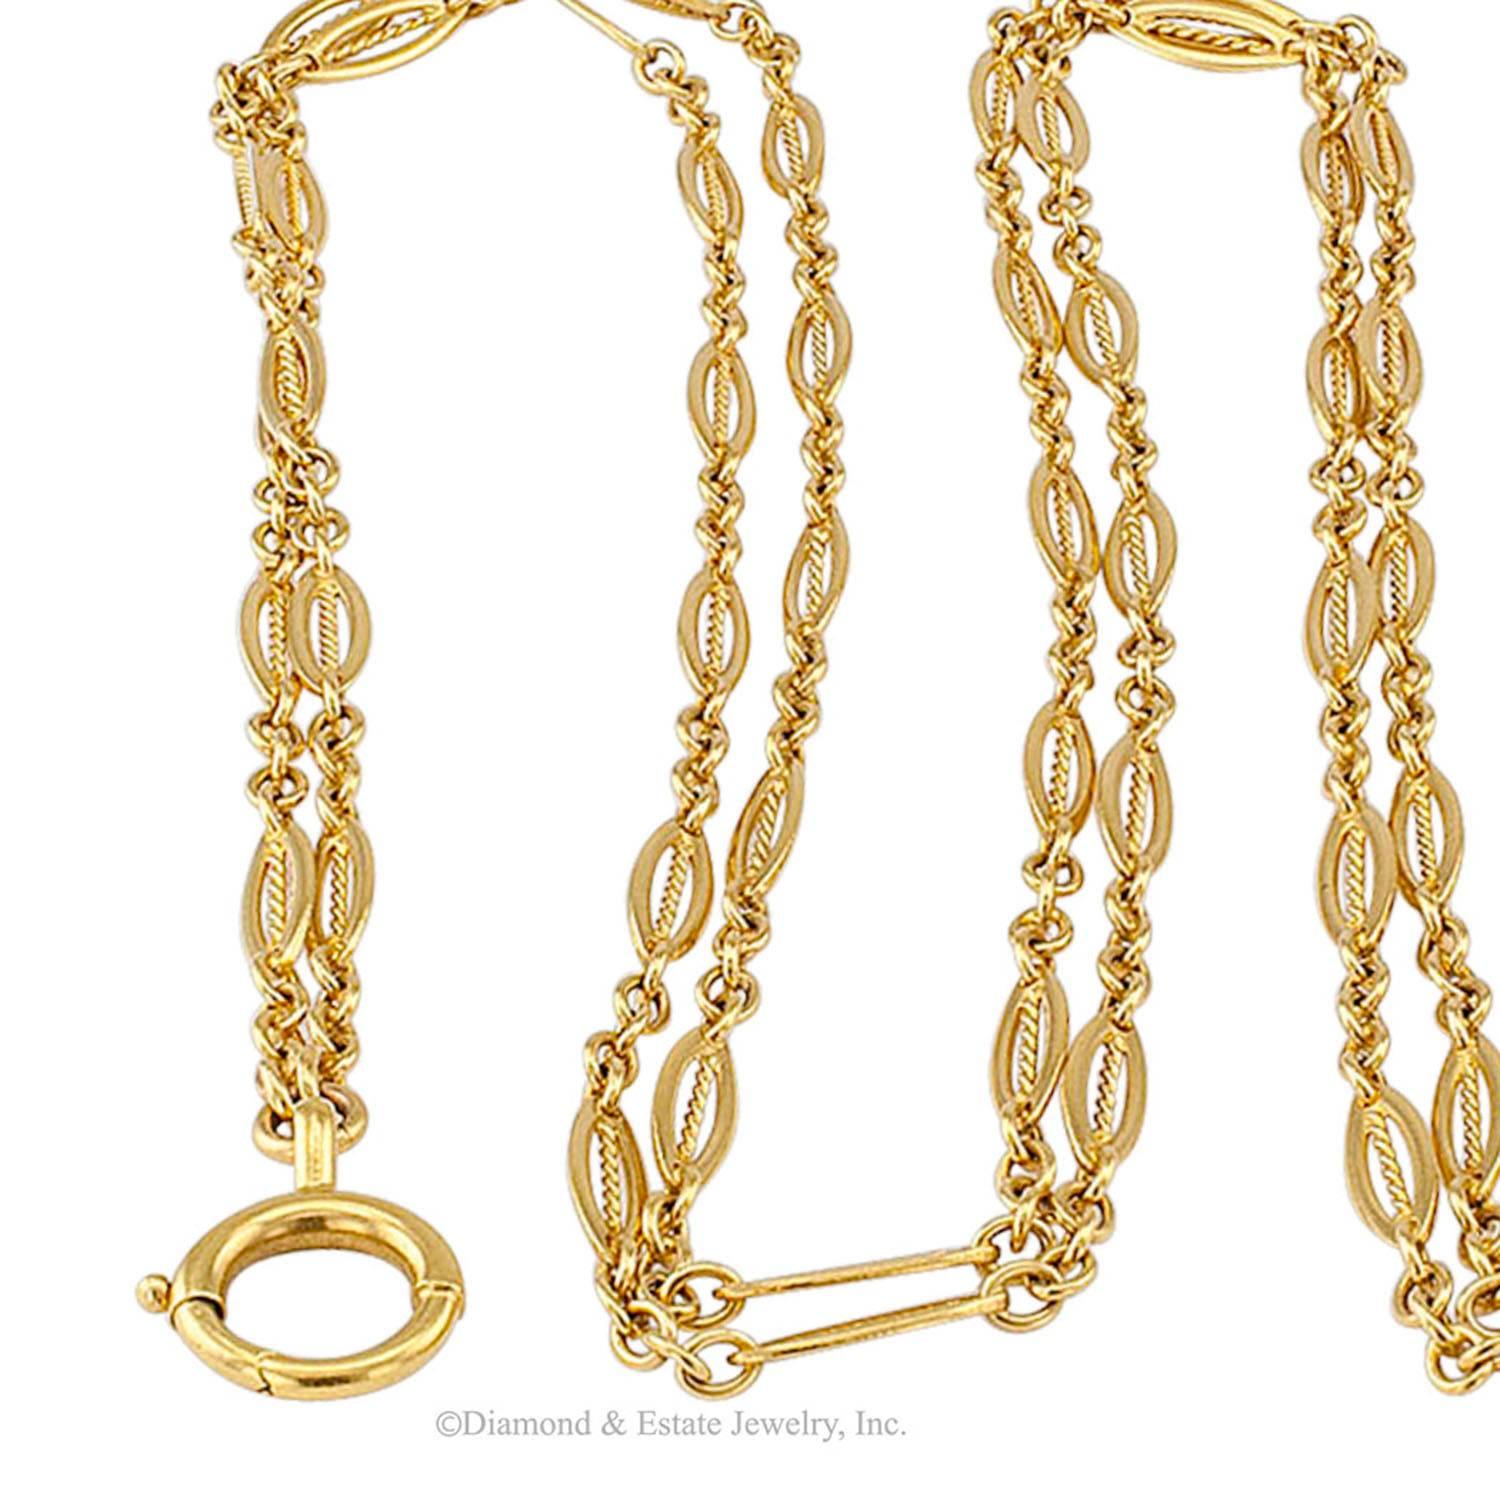 French Antique Long Chain Gold Necklace

French 1900s long chain necklace in 18-karat gold.  Hand crafted, flat and open, navette-shaped links filled with a twisted wire motif on a continuous loop 60" long, fitted with a side jump ring to